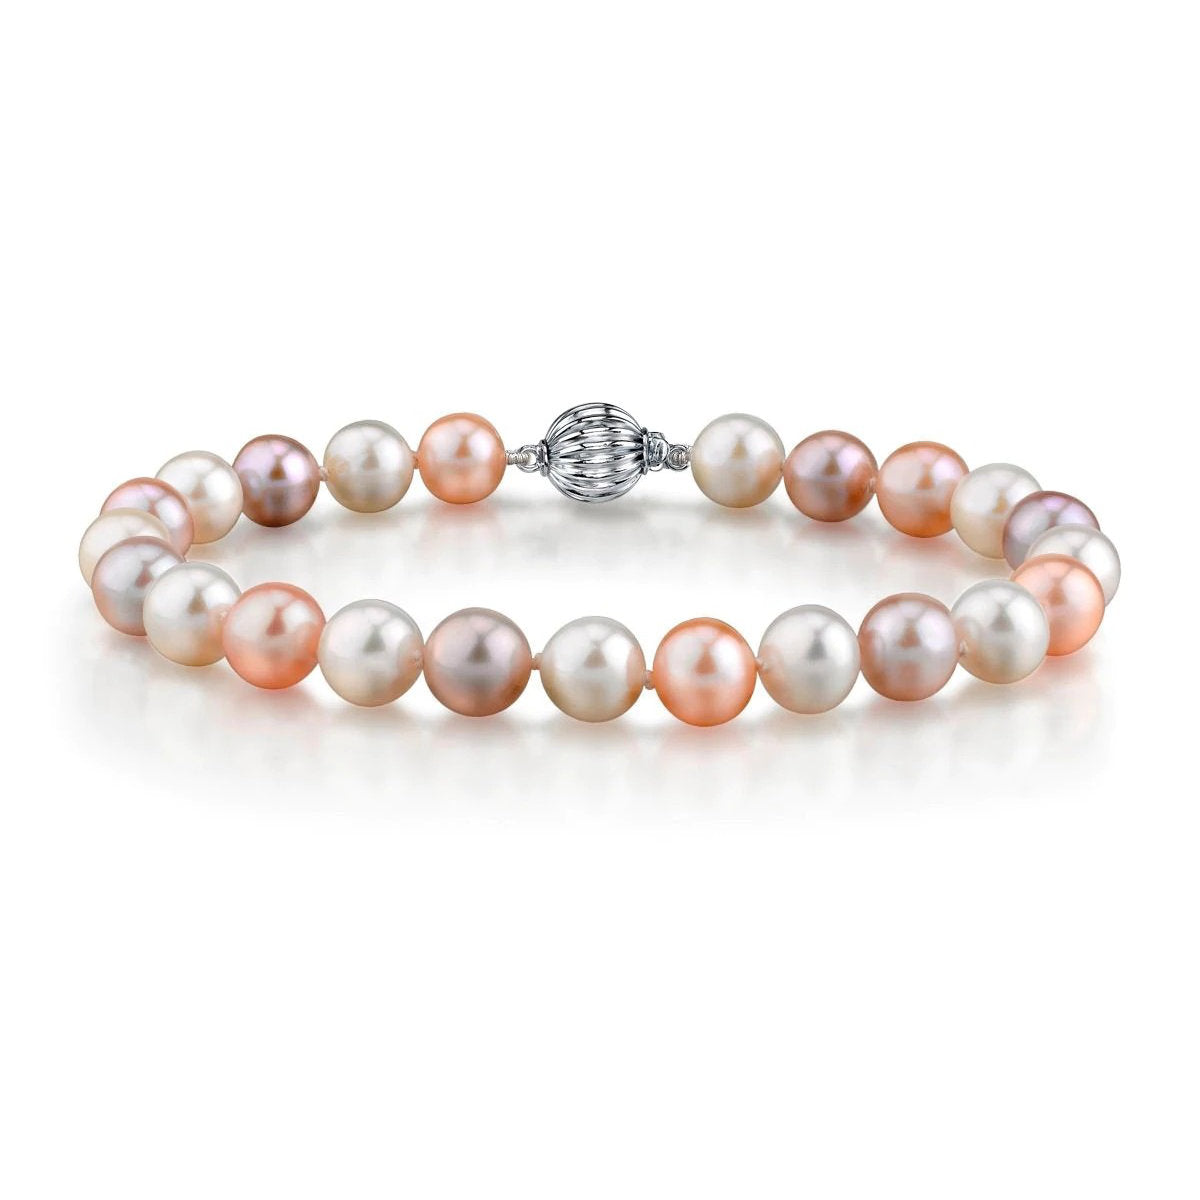 7.0-7.5mm Multicolor Freshwater Pearl Bracelet in AAA Quality from Pure Pearls